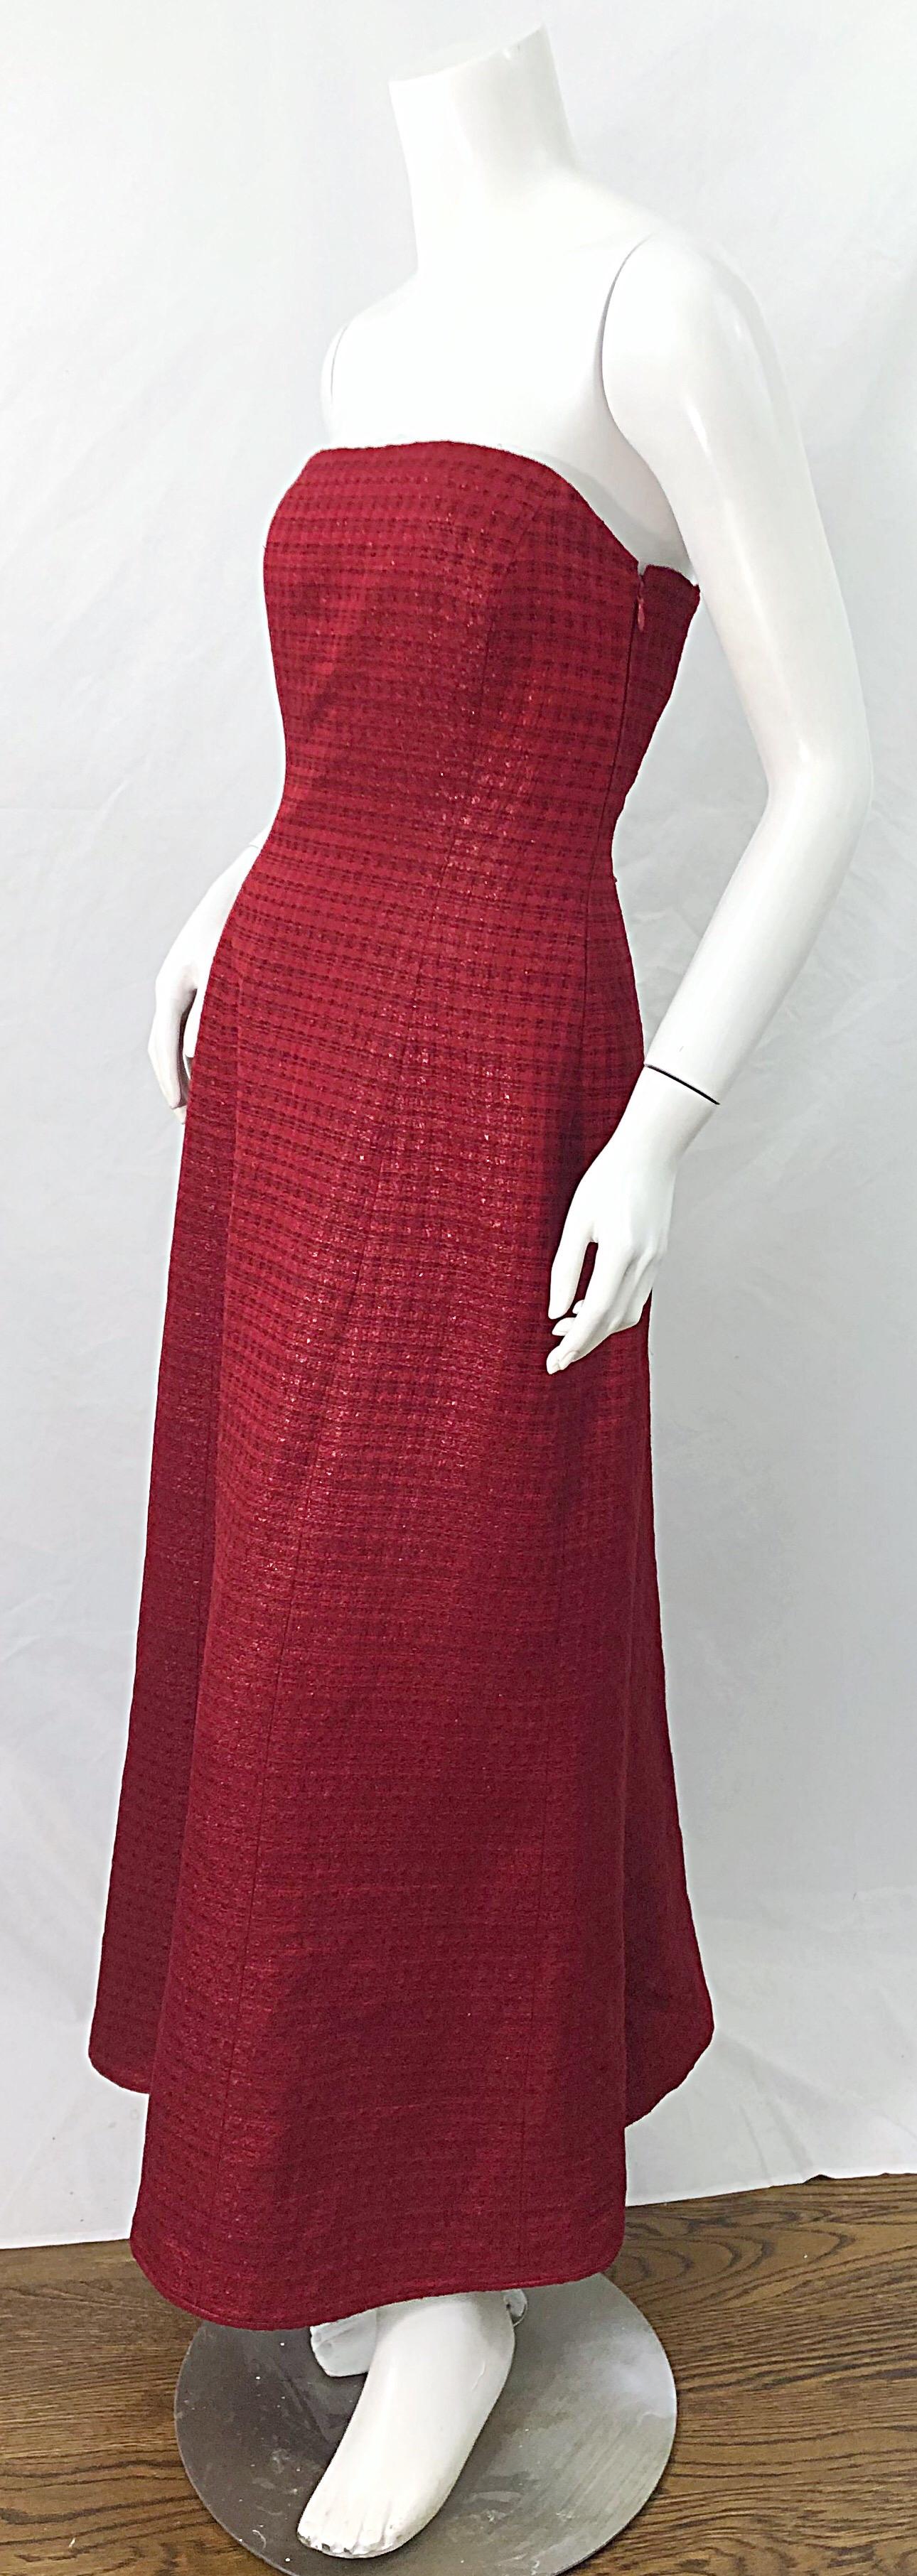 Women's 1990s Louis Feraud Cranberry Red Strapless Vintage 90s Silk + Wool Gown Dress For Sale